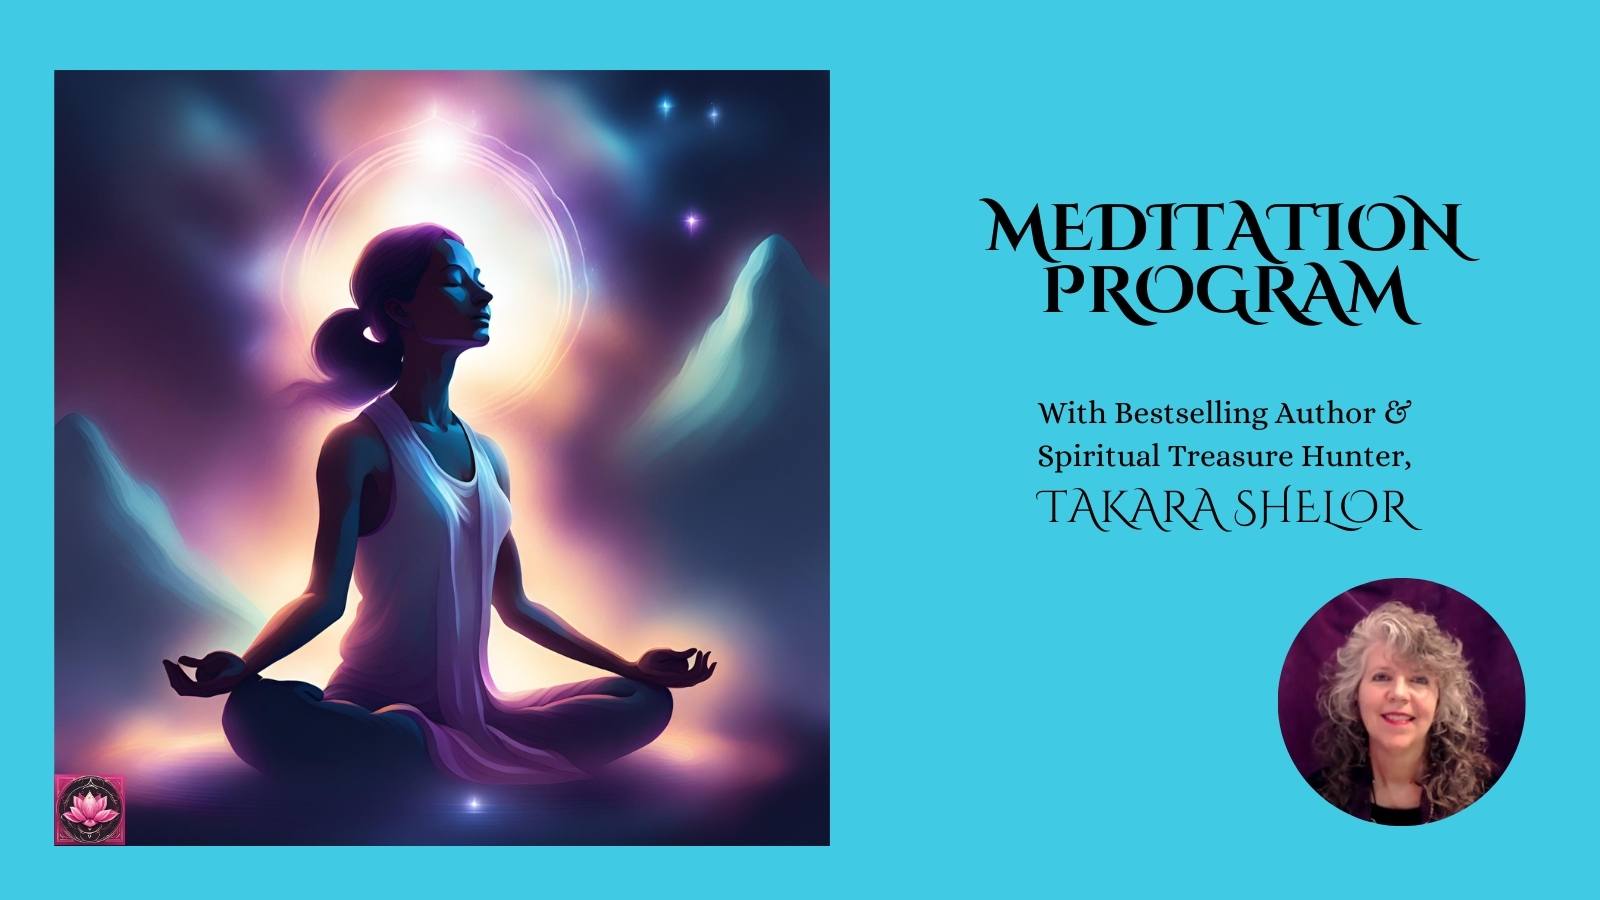 Learn how to meditate with the Magnificent U Meditation Program by Takara